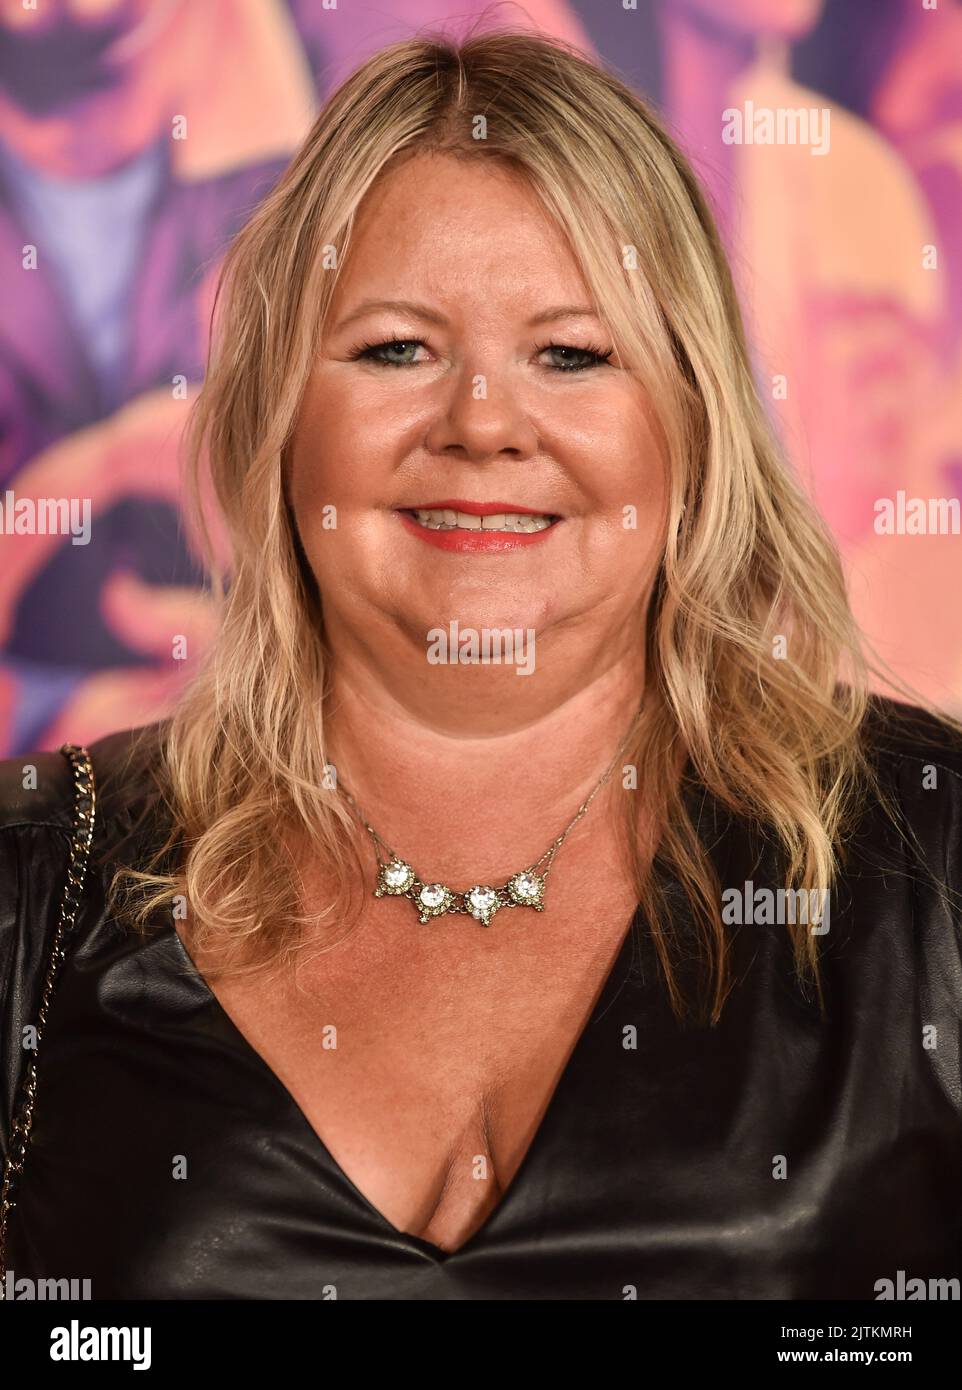 Amy Jarvela arriving to the ‘Clerks III’ Los Angeles Premiere at TCL Chinese 6 Theatre on August 24, 2022 in Hollywood, CA. © OConnor/AFF-USA.com Stock Photo